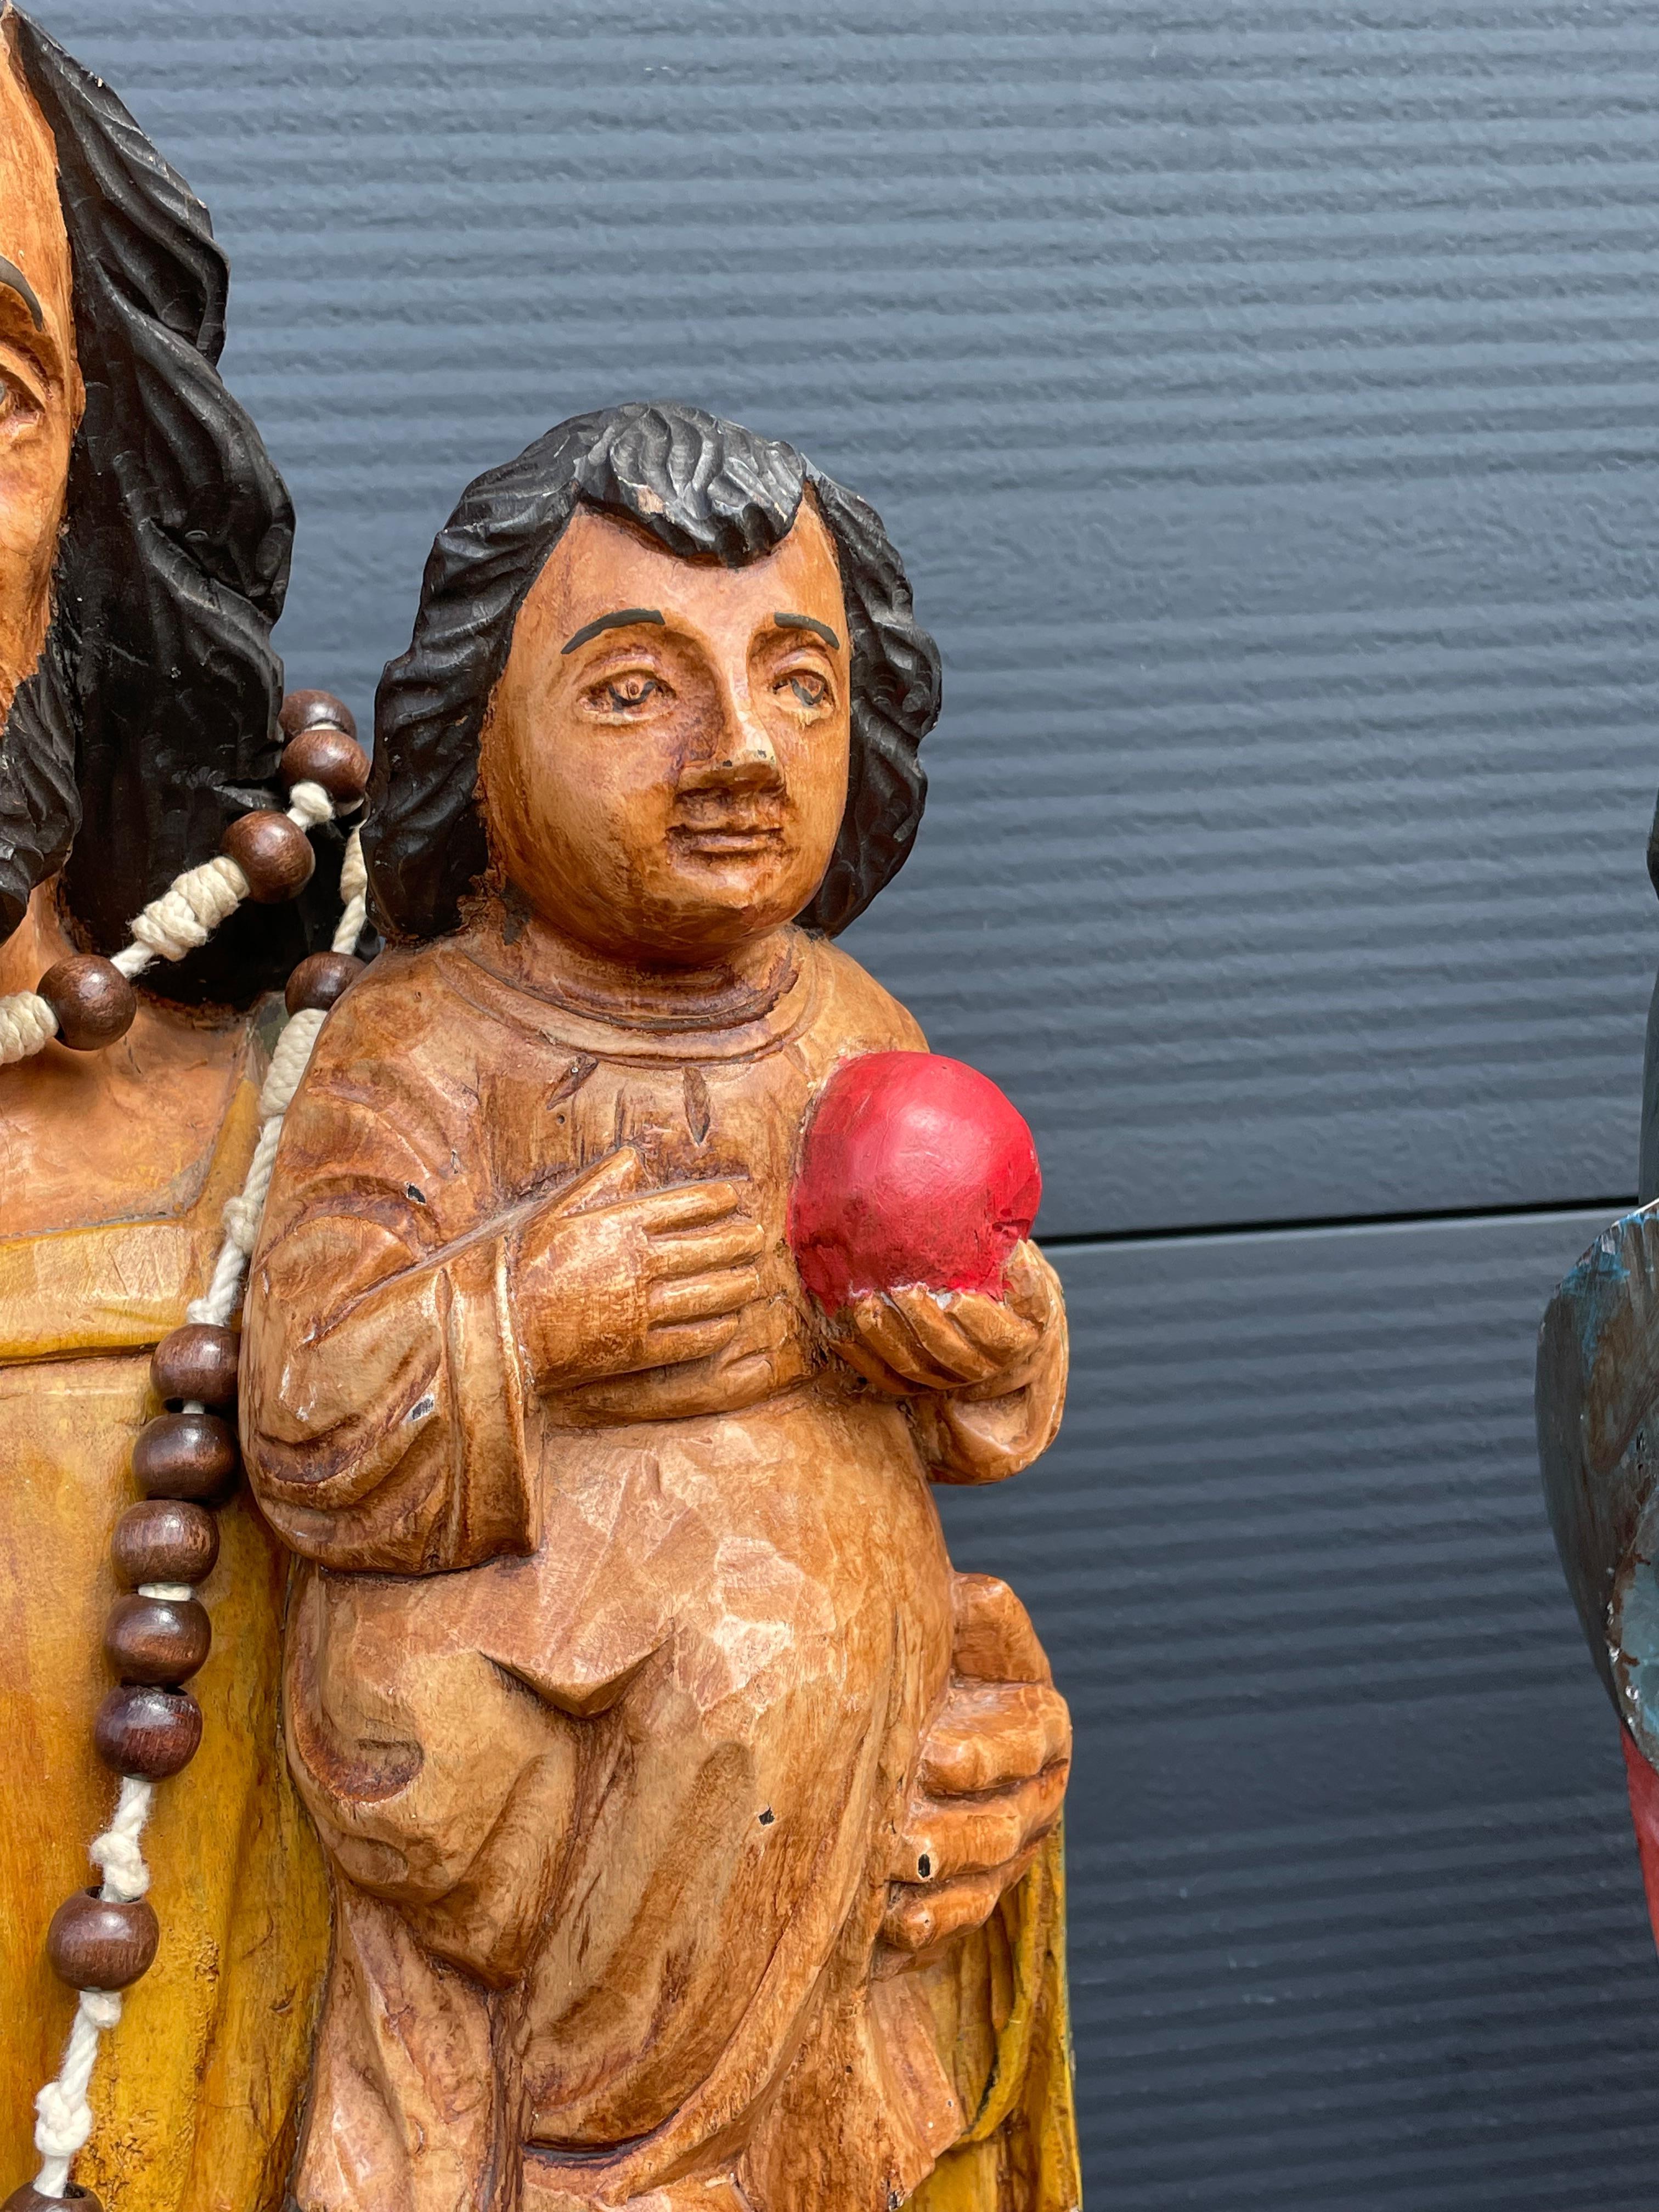 Large Pair of Hand Carved Wooden Mary & Joseph Sculptures, Both with Child Jesus im Angebot 7